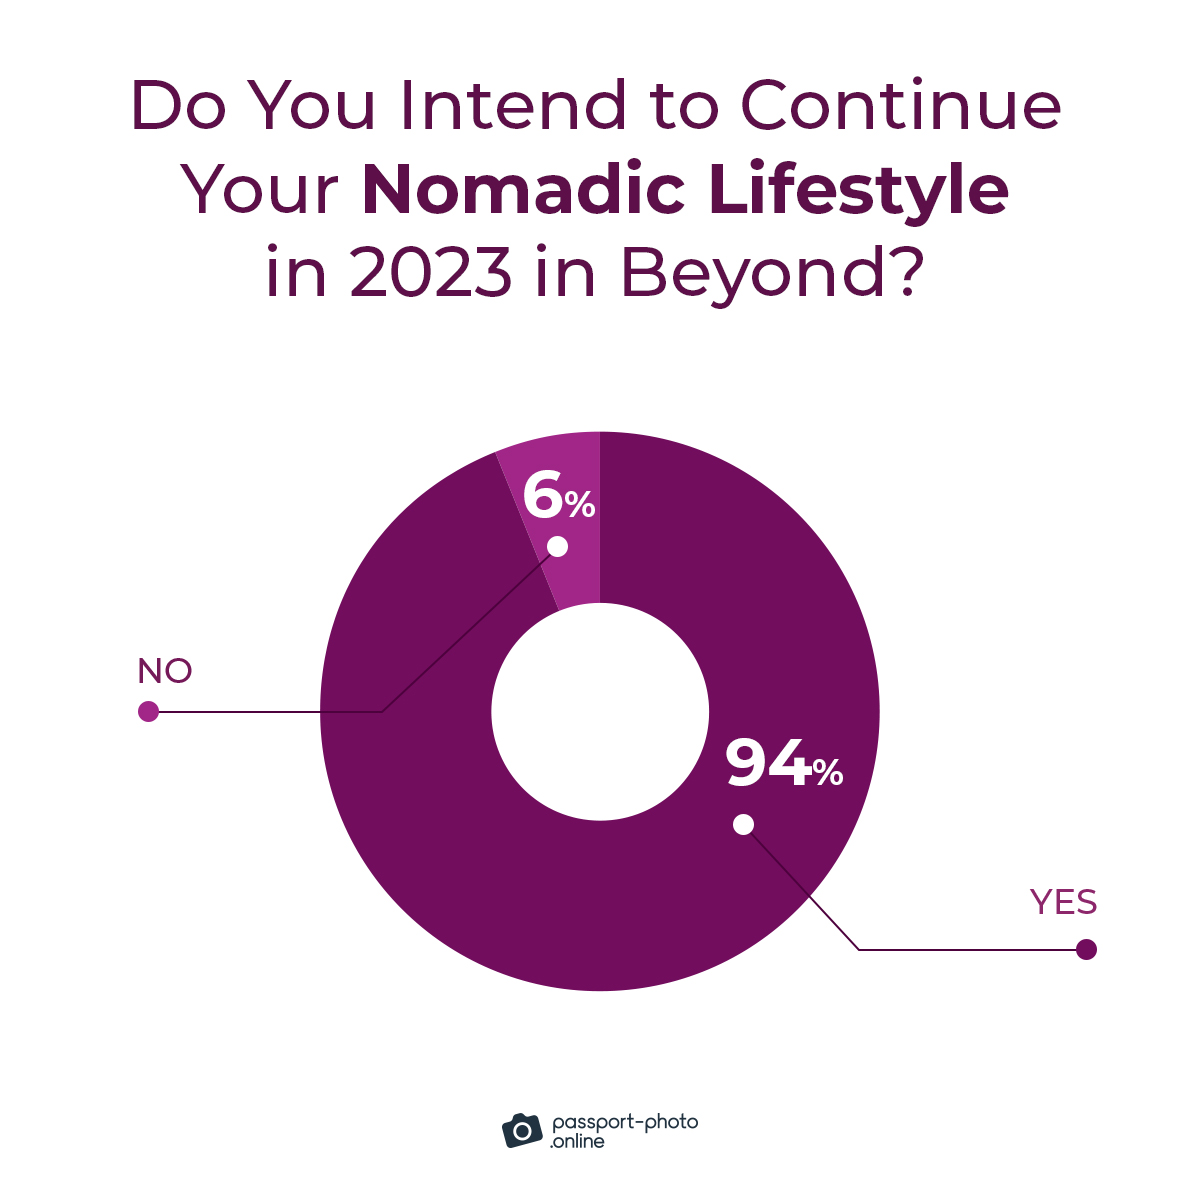 94% of digital nomads intend to continue their nomadic lifestyle in 2023 and beyond